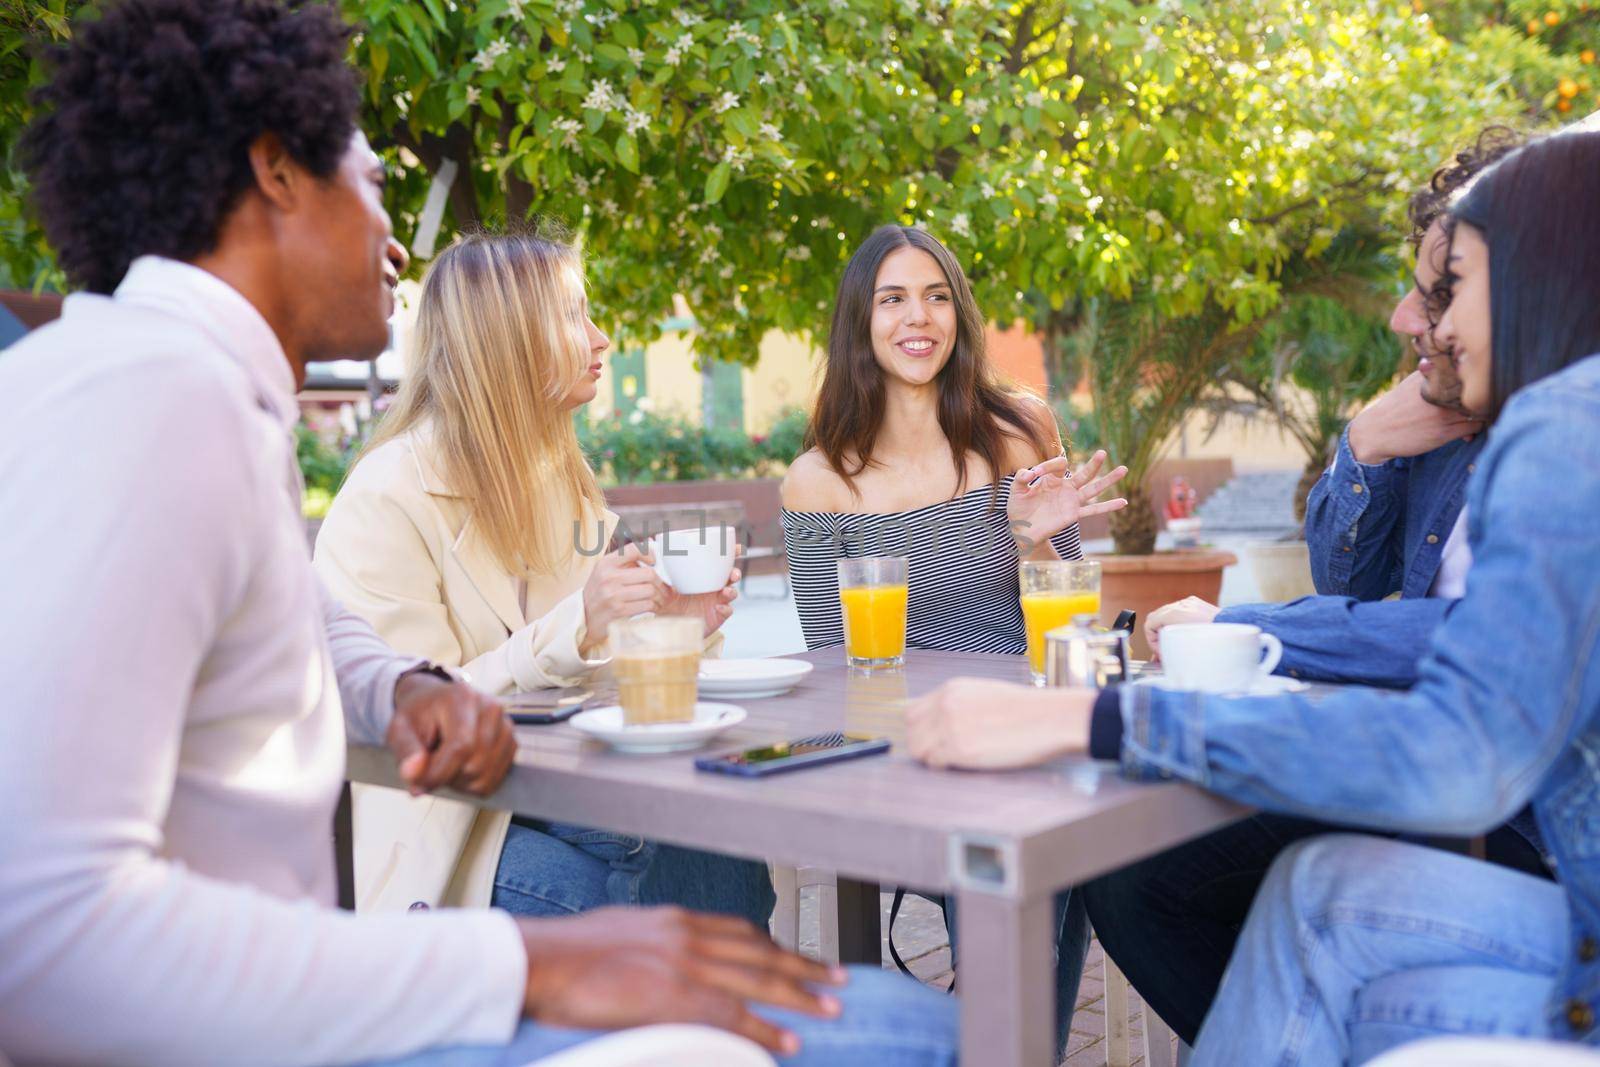 Multi-ethnic group of friends having a drink together in an outdoor bar. Young people having fun.